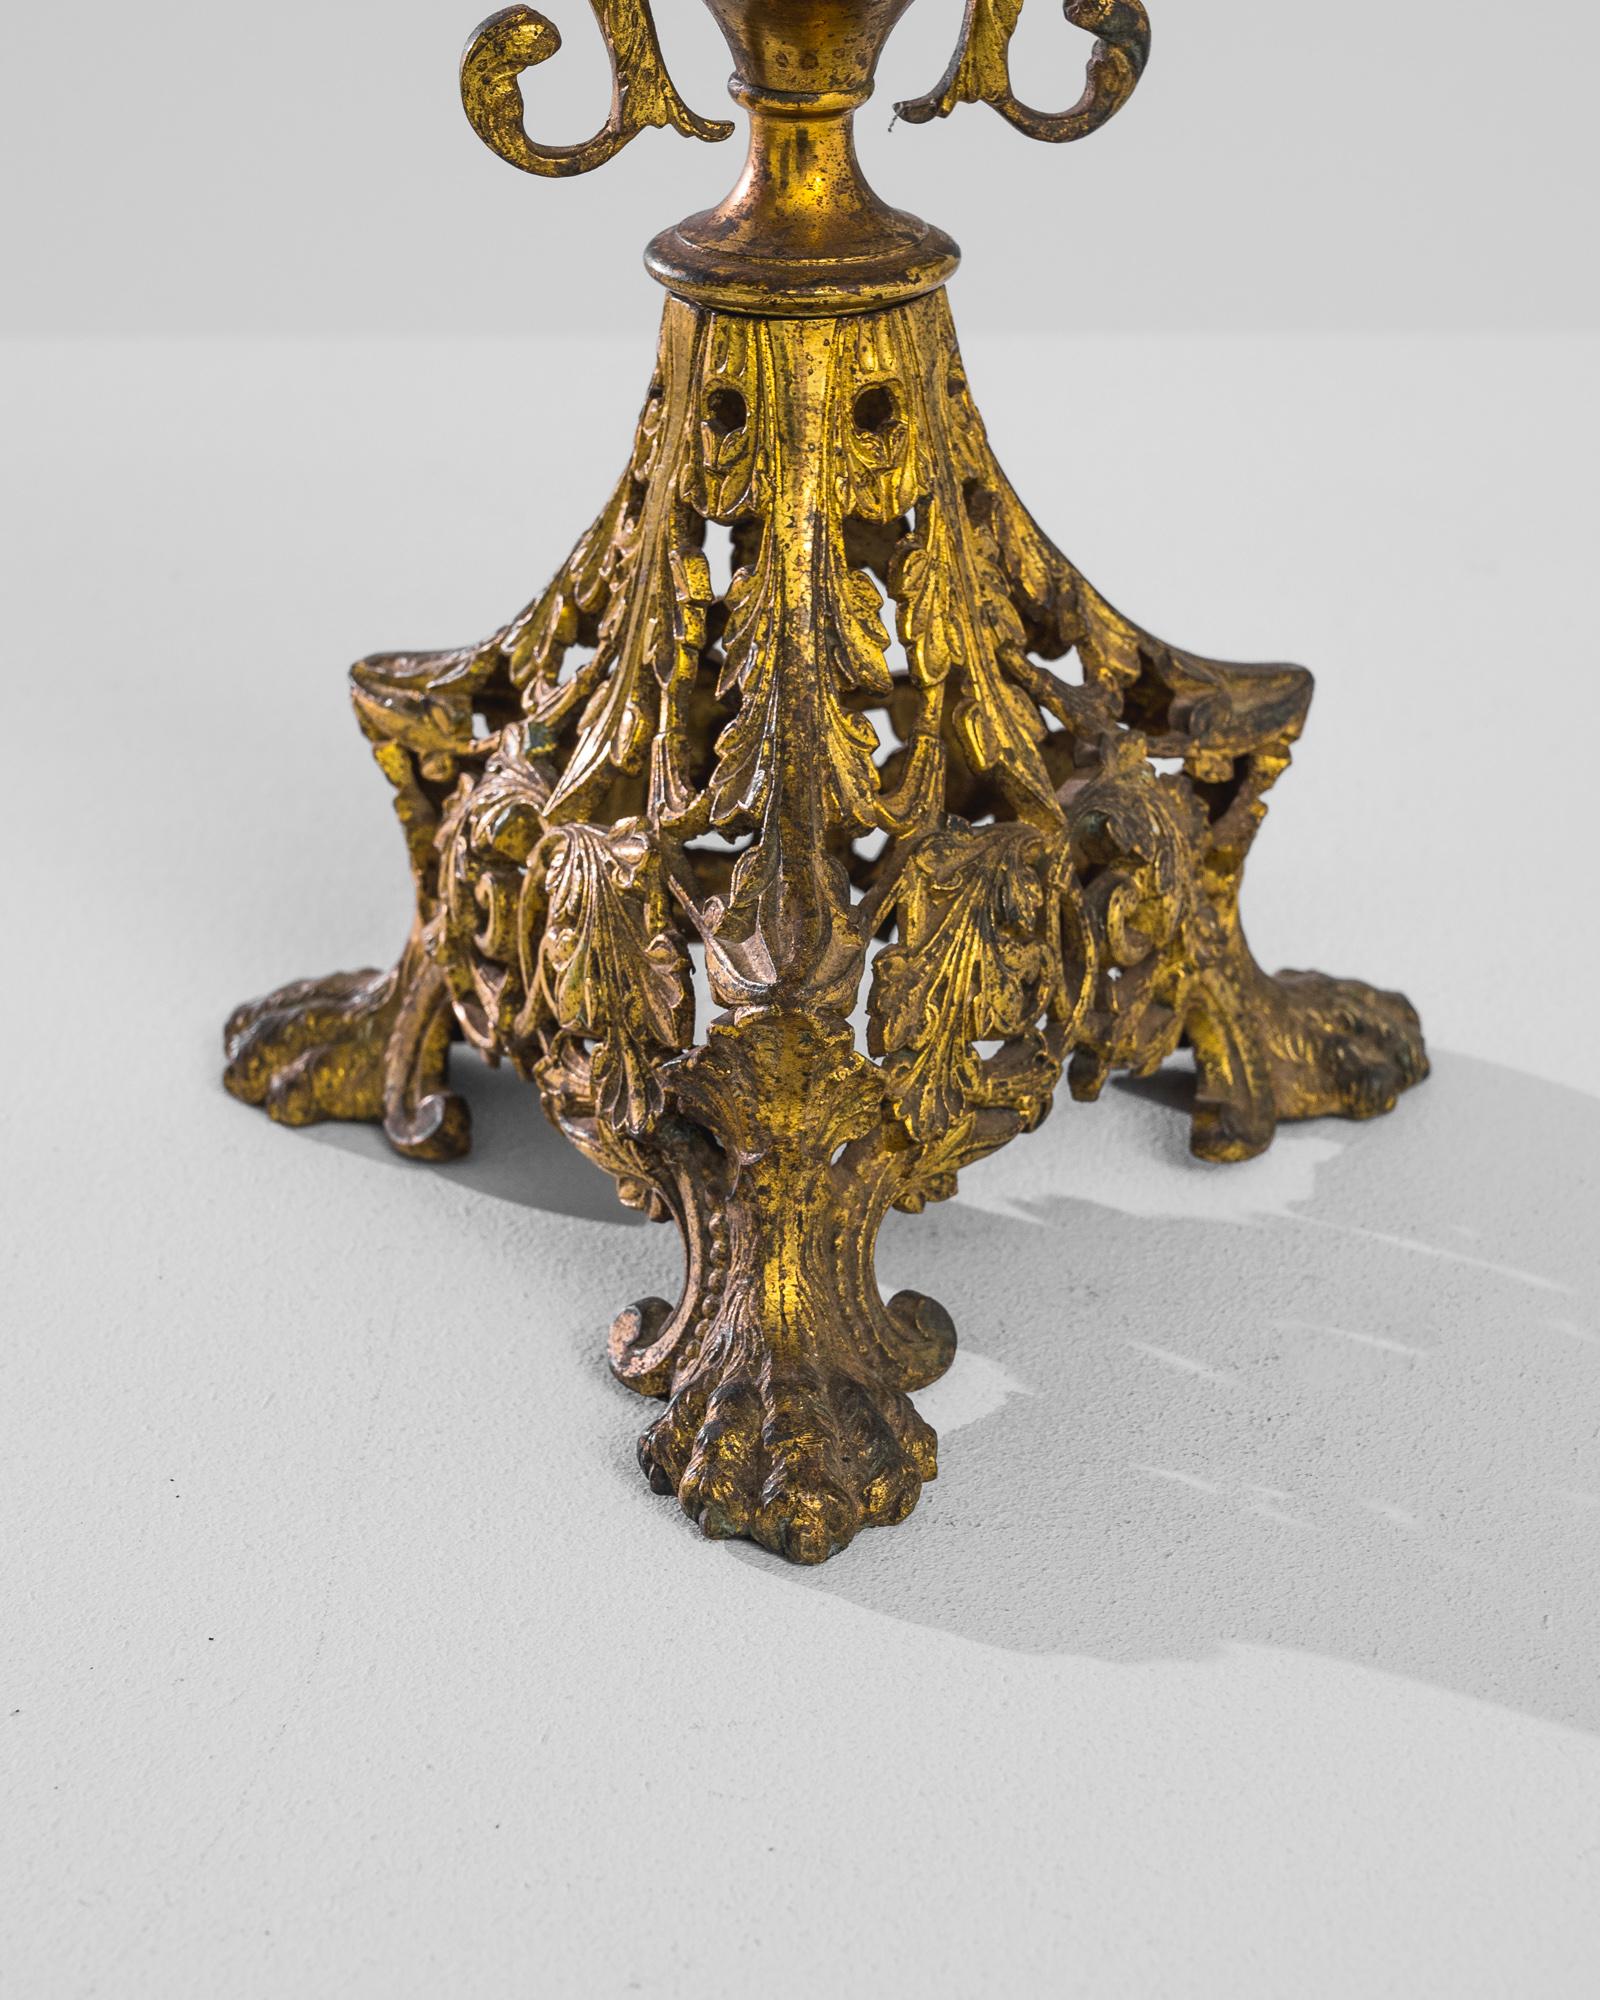 Indulge in the opulence of the 1900s with this French Brass Candlestick. Crafted in the 19th century, this gilt-metal five-light candelabra exudes the grandeur of the Baroque style. It is gracefully cast as a bouquet of lilies, their stems rising